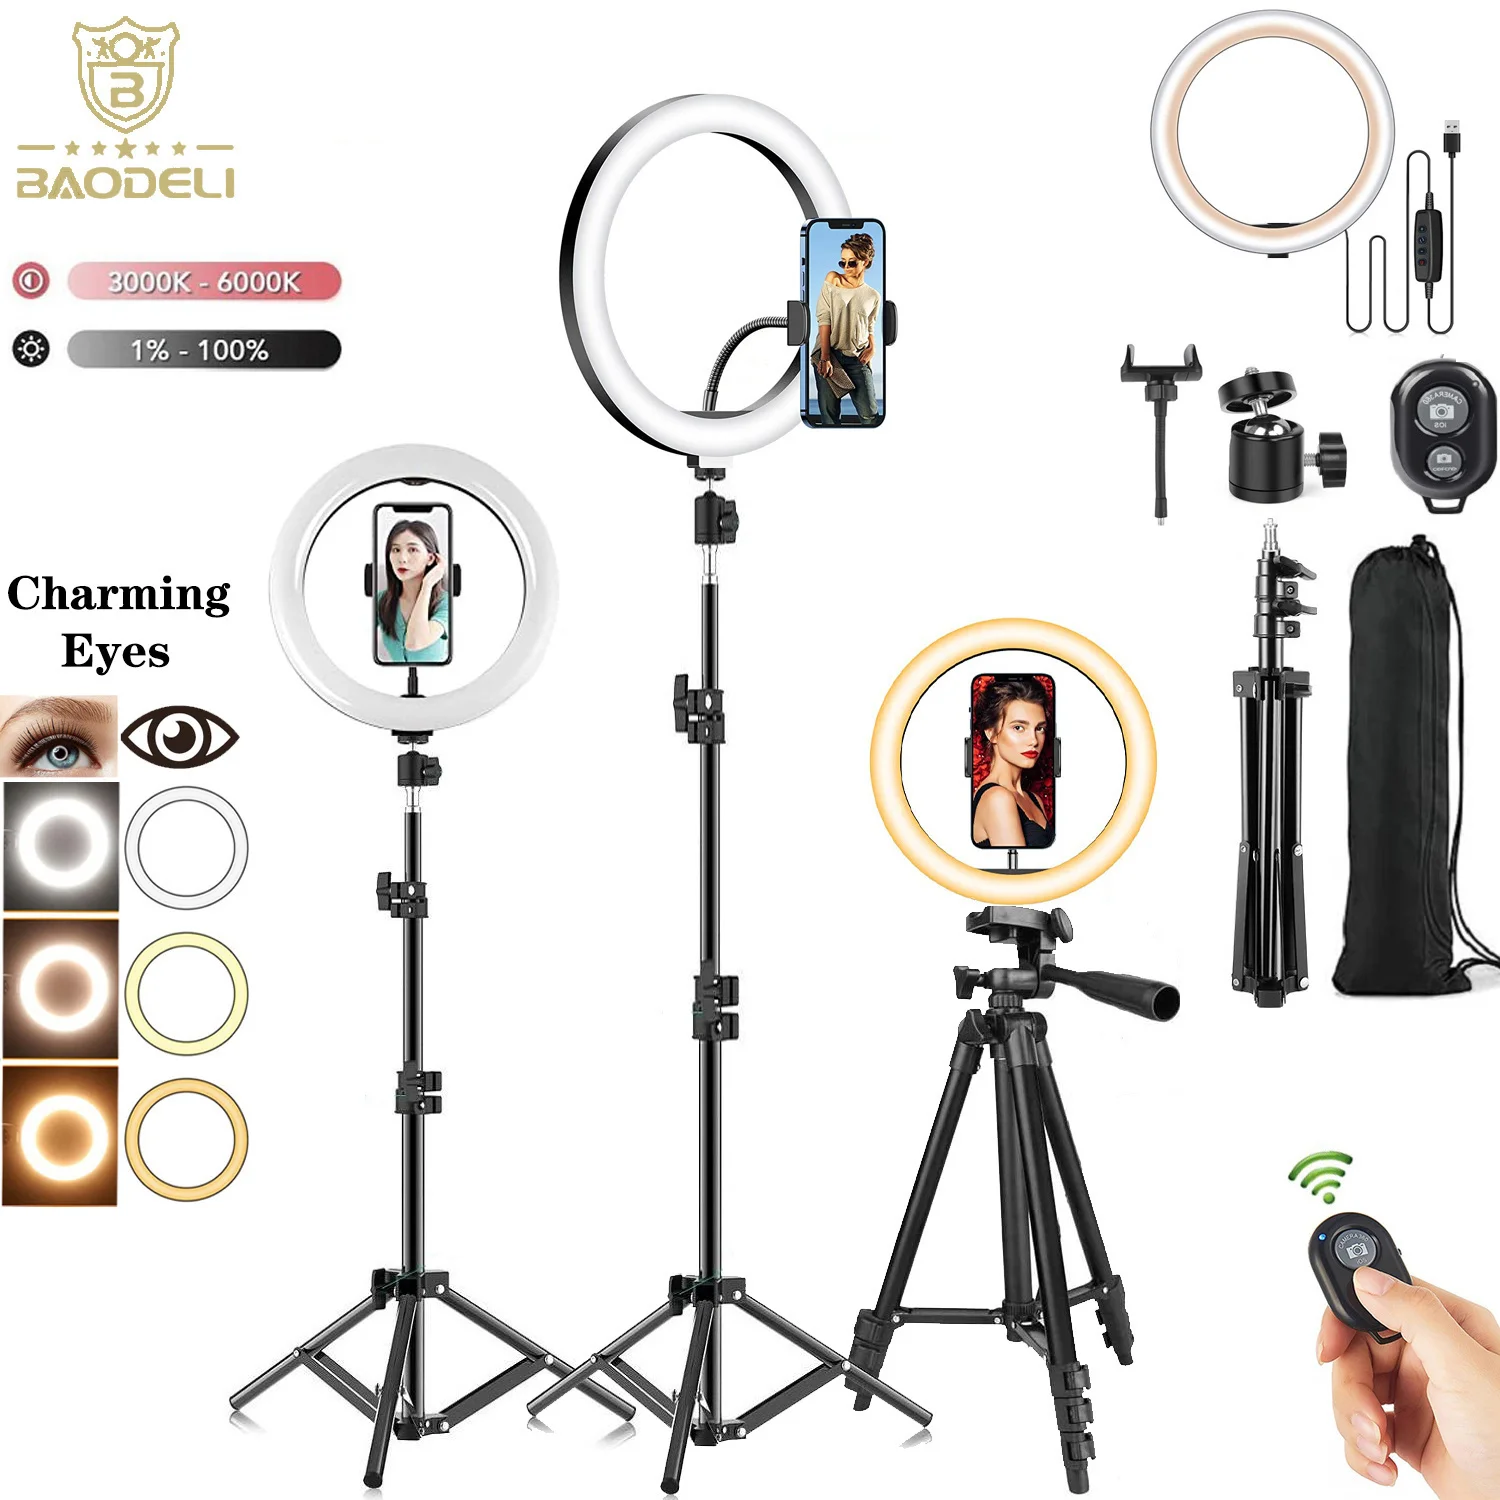 10'' 26cm LED Selfie Ring Light Photography Video Light RingLight Phone Stand Tripod Fill Light Dimmable Lamp Trepied Streaming